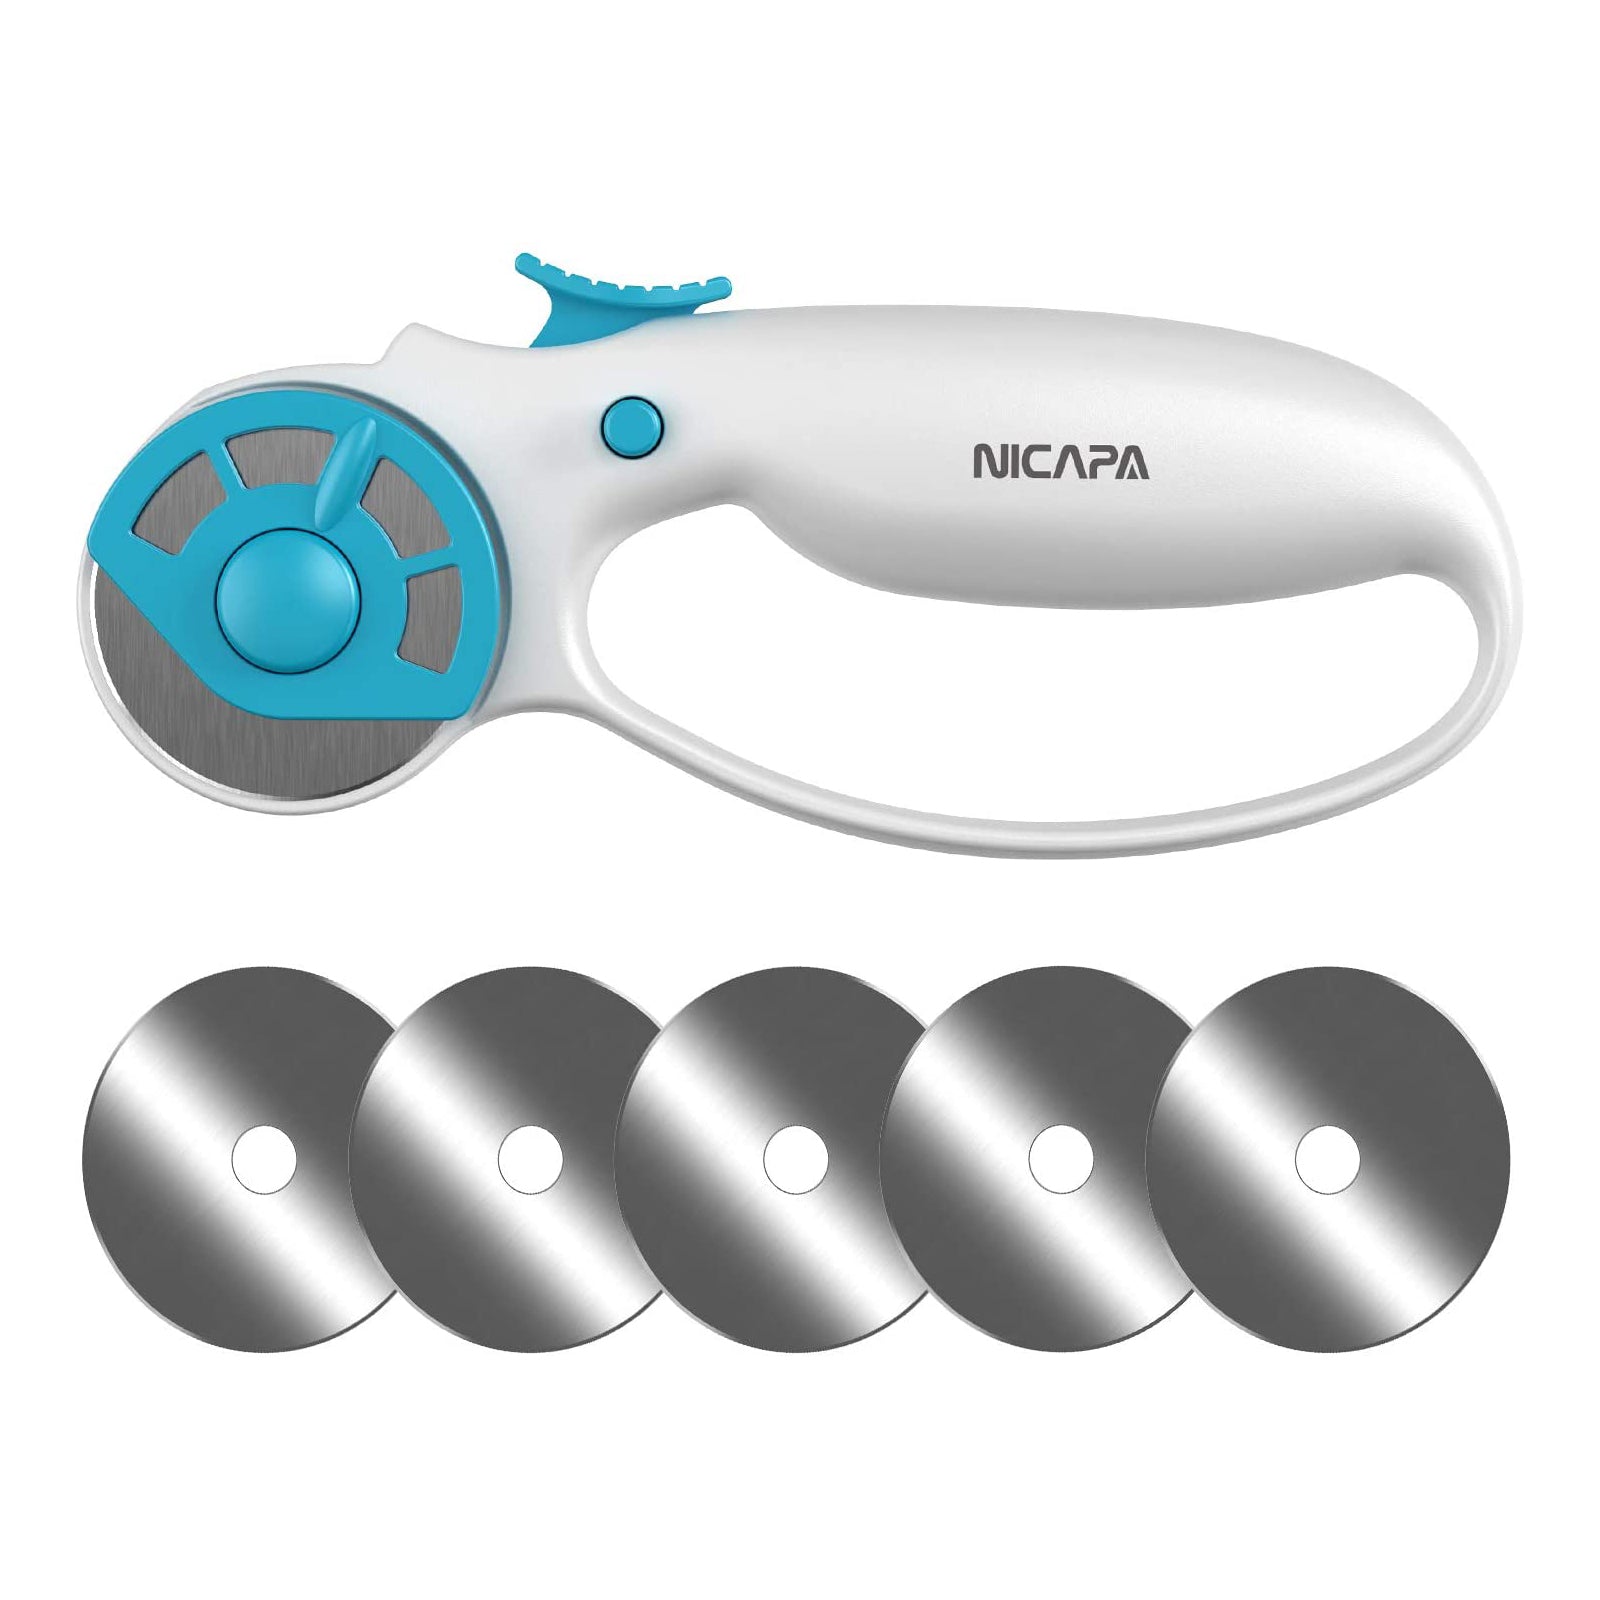 Nicapa 45mm Rotary Cutter for Fabric with Safety Lock Ergonomic Classic Comfort Loop Rotary Cutter for Crafting Sewing Quilting